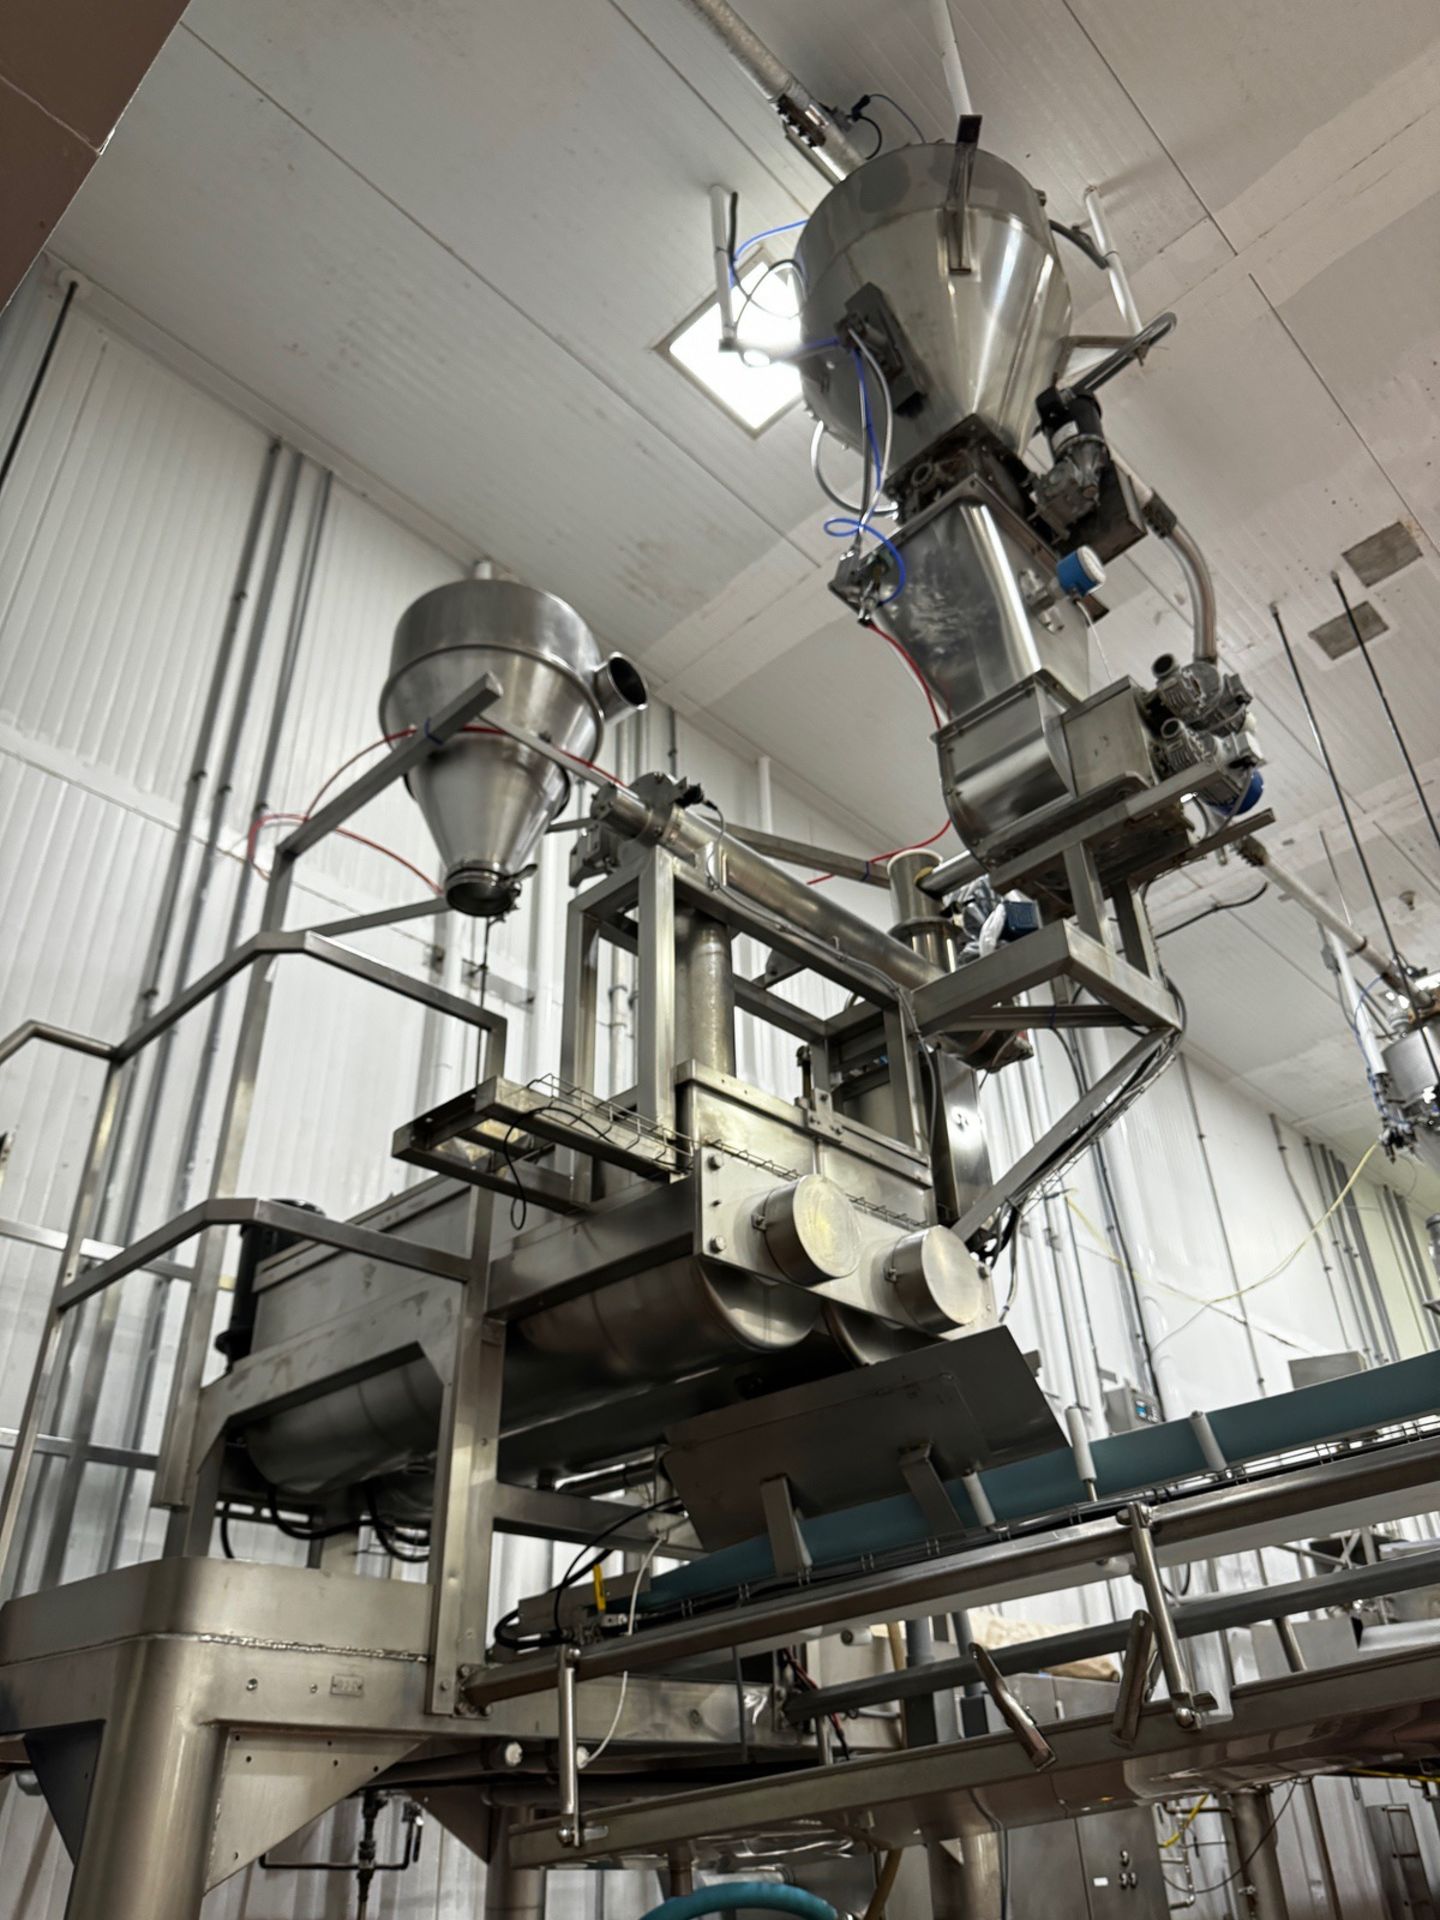 Double Grim Continuous Mixer with (2) Ingredient Receivers, Ingredien - Subj to Bulk | Rig Fee $4500